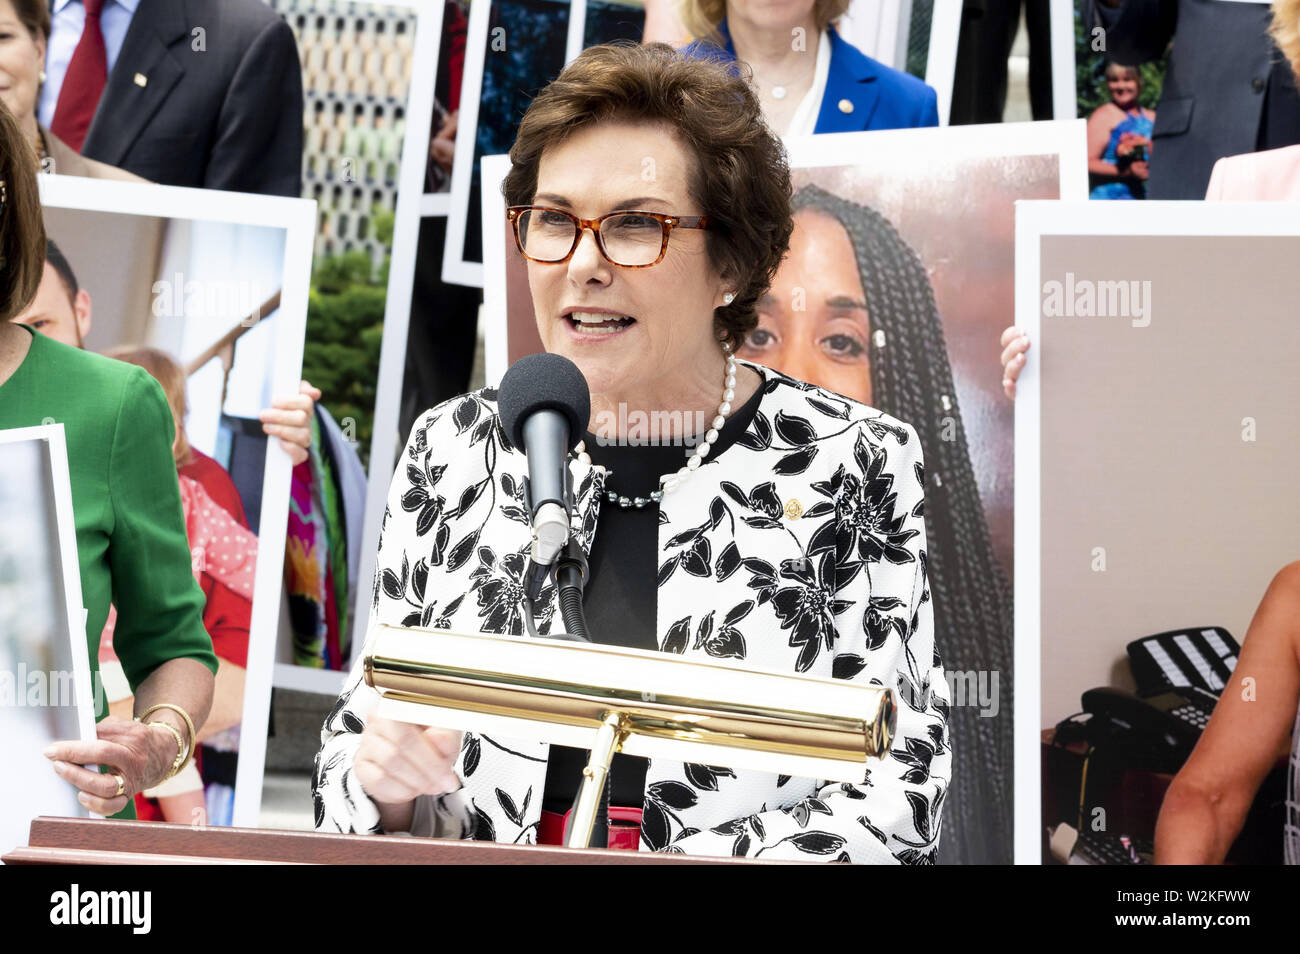 Washington, D.C, USA. 9th July, 2019. U.S. Senator JACKY ROSEN (D-NV) in front of a group of Democratic Senators and Representatives on the steps of the U.S. Capitol speaking against the ''assault on protections for people with pre-existing conditions'', on the steps of the US Capitol in Washington, DC on July 9, 2019. Credit: Michael Brochstein/ZUMA Wire/Alamy Live News Stock Photo